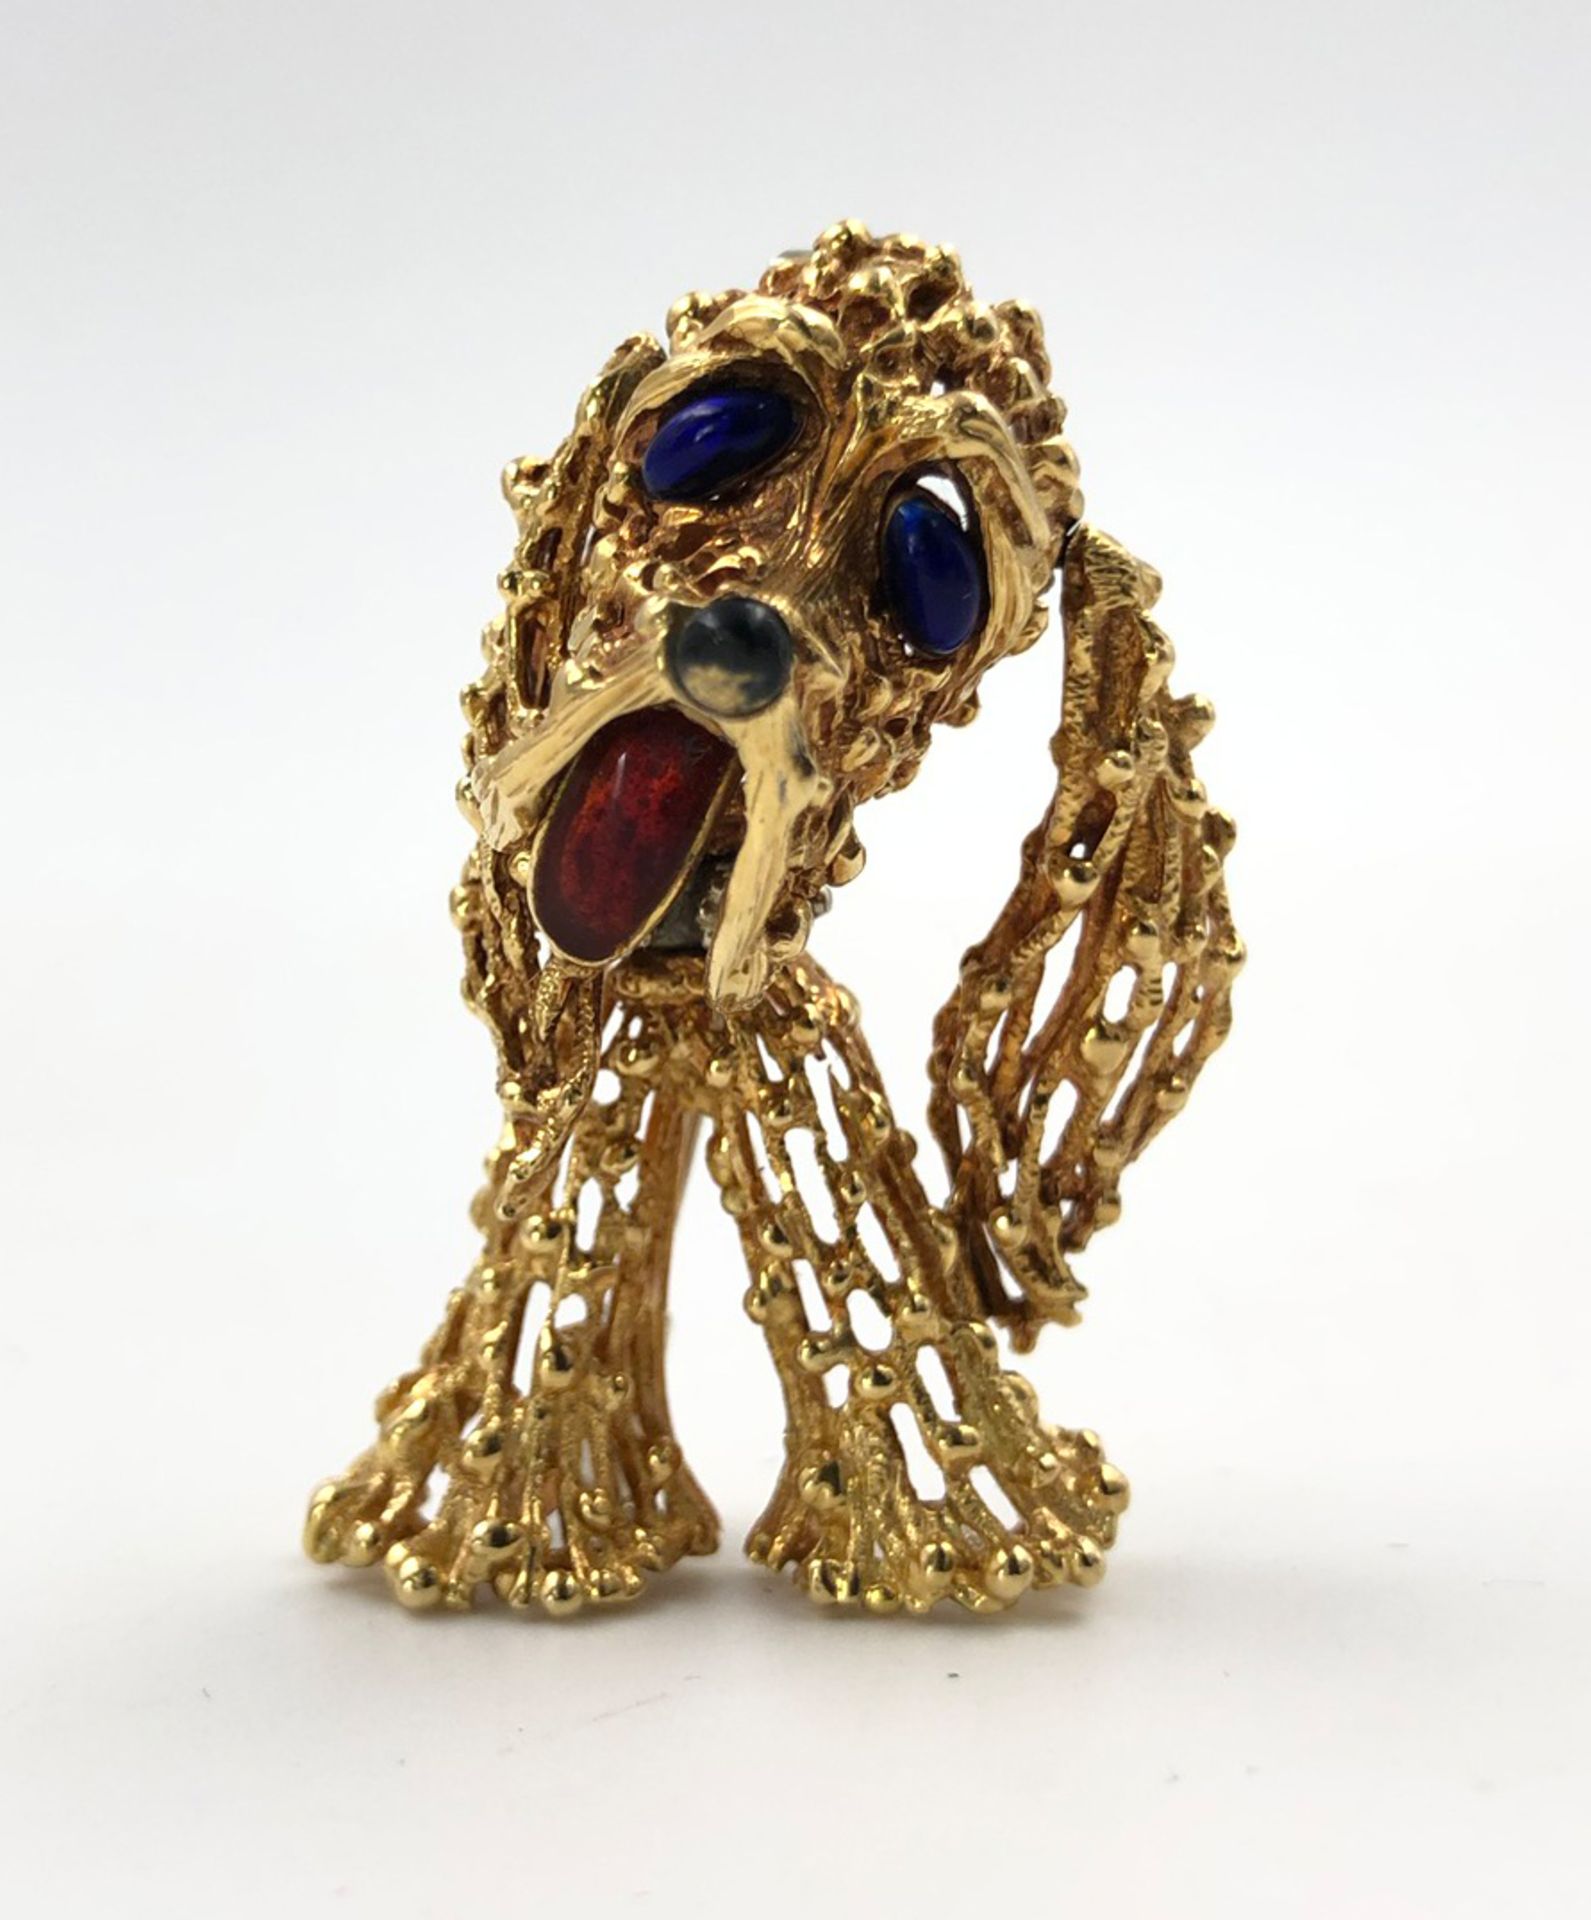 Brooch. Poodle. 750 gold. Gemstones.16.9 grams gross. Goldsmithing. Probably one of a kind.